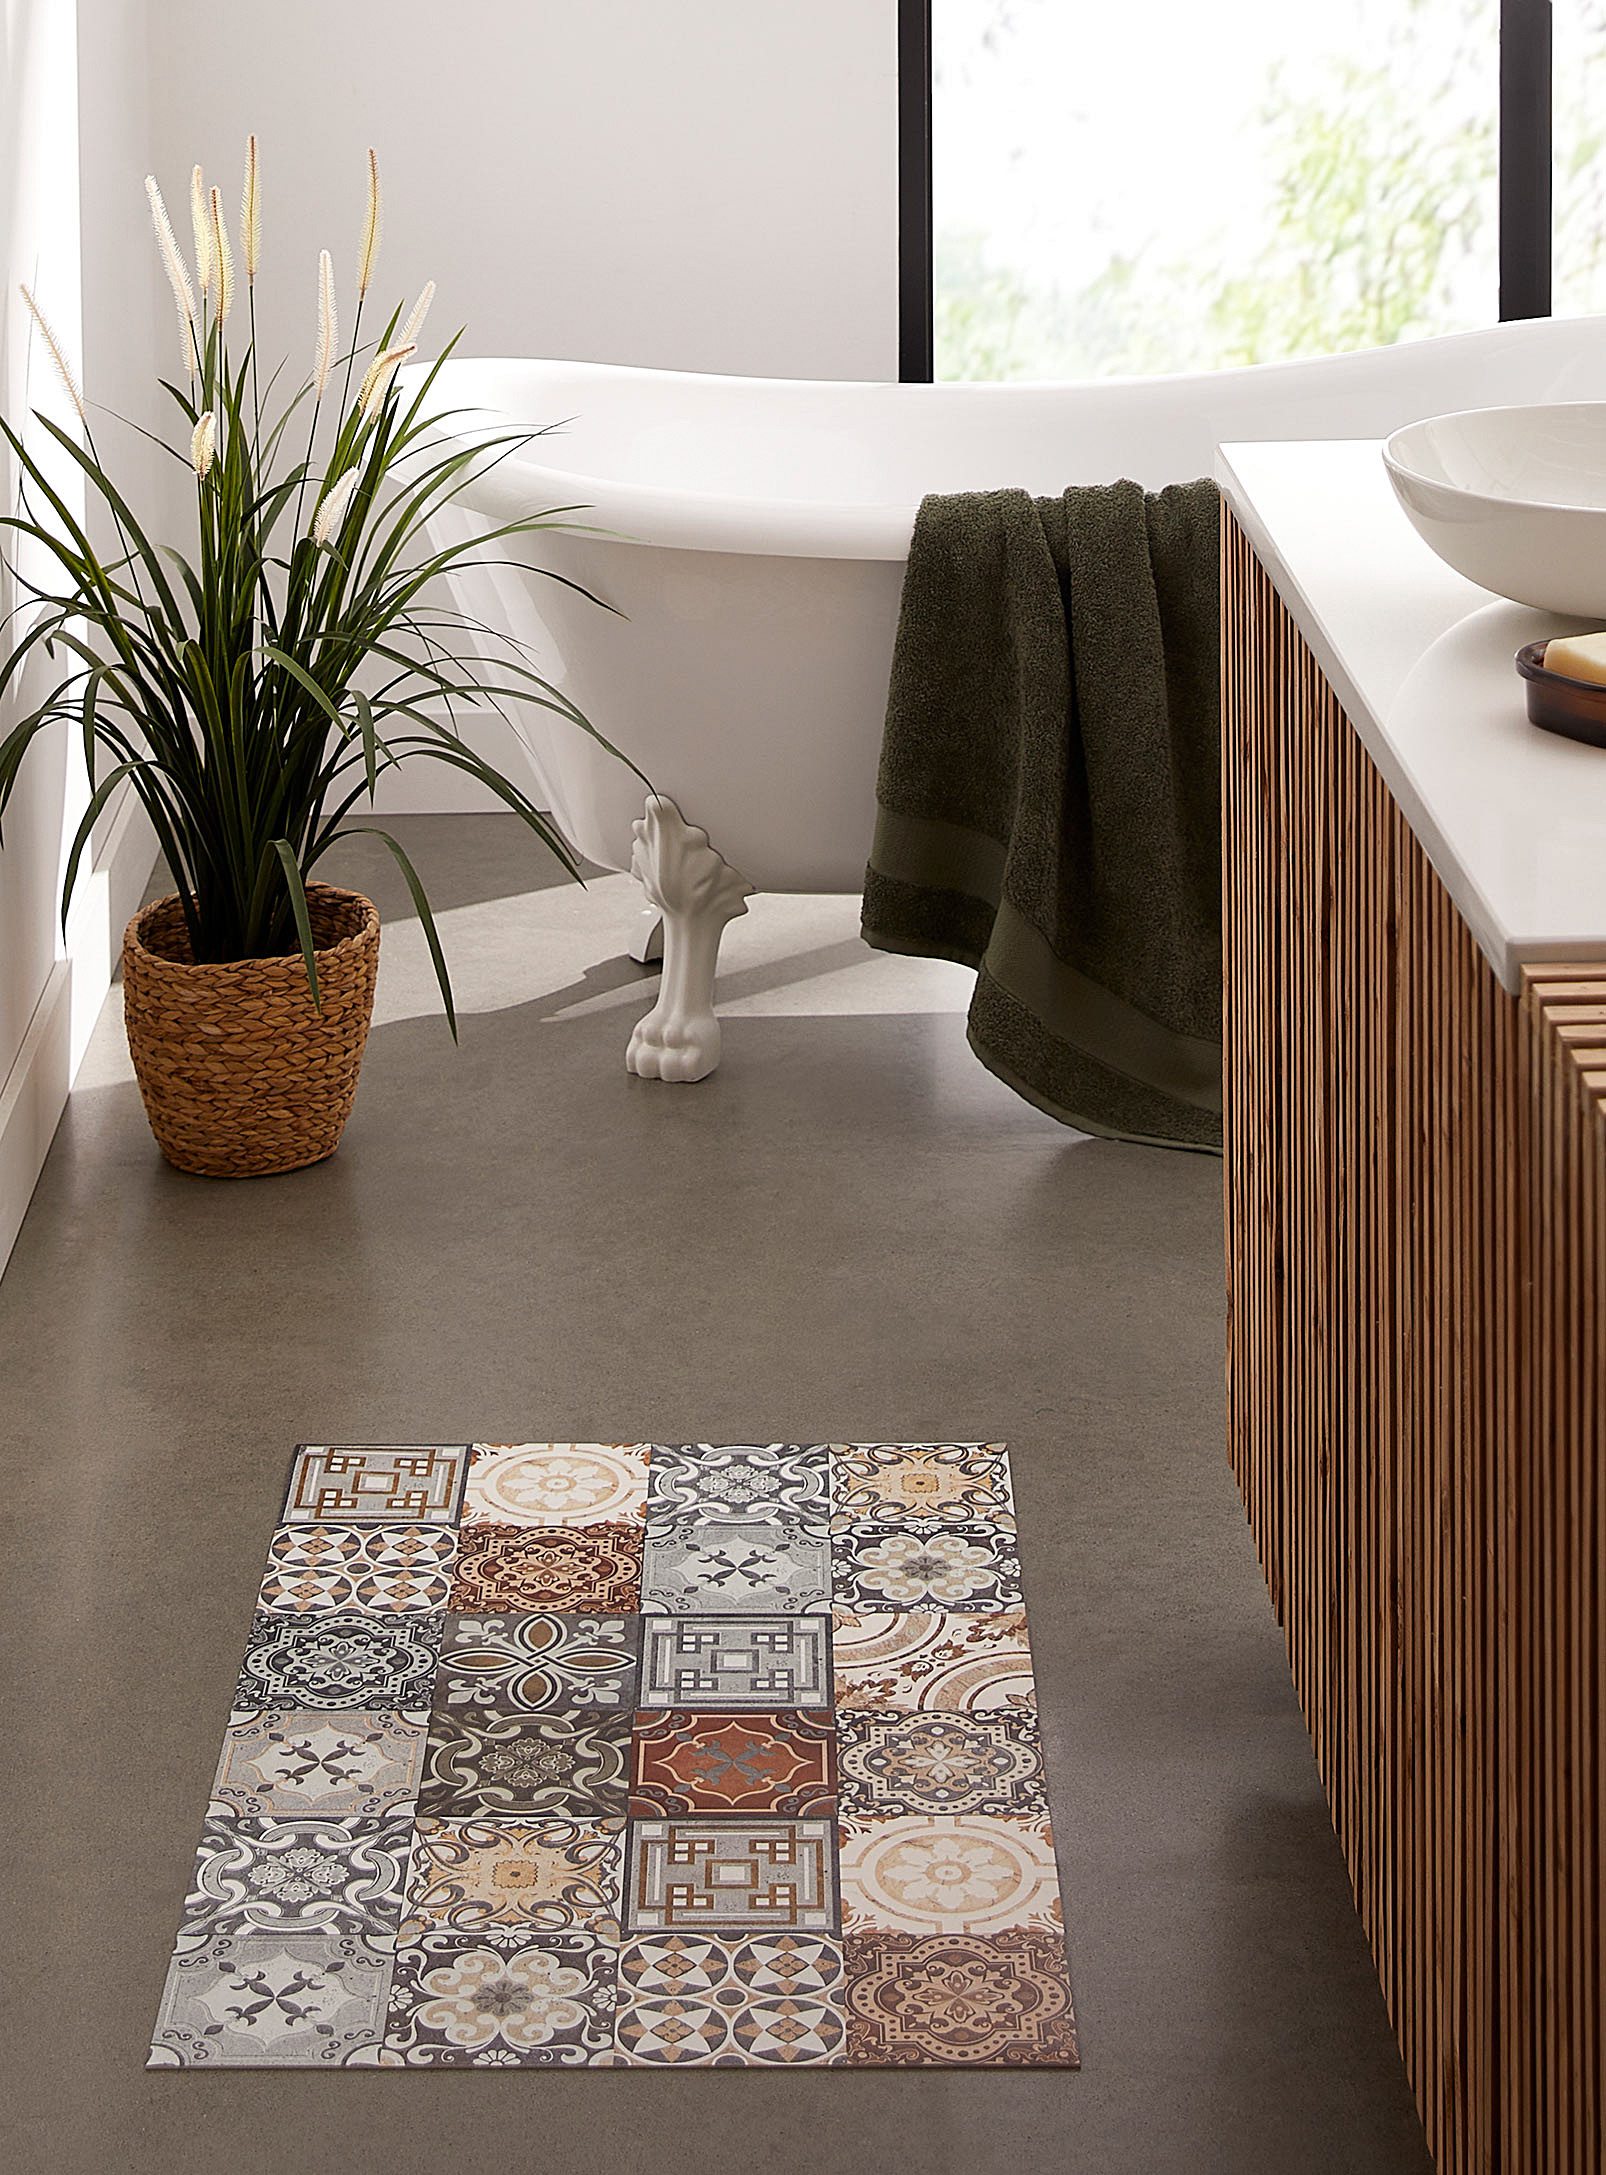 Adama Brown Azulejos Vinyl Rug See Available Sizes In Patterned Grey